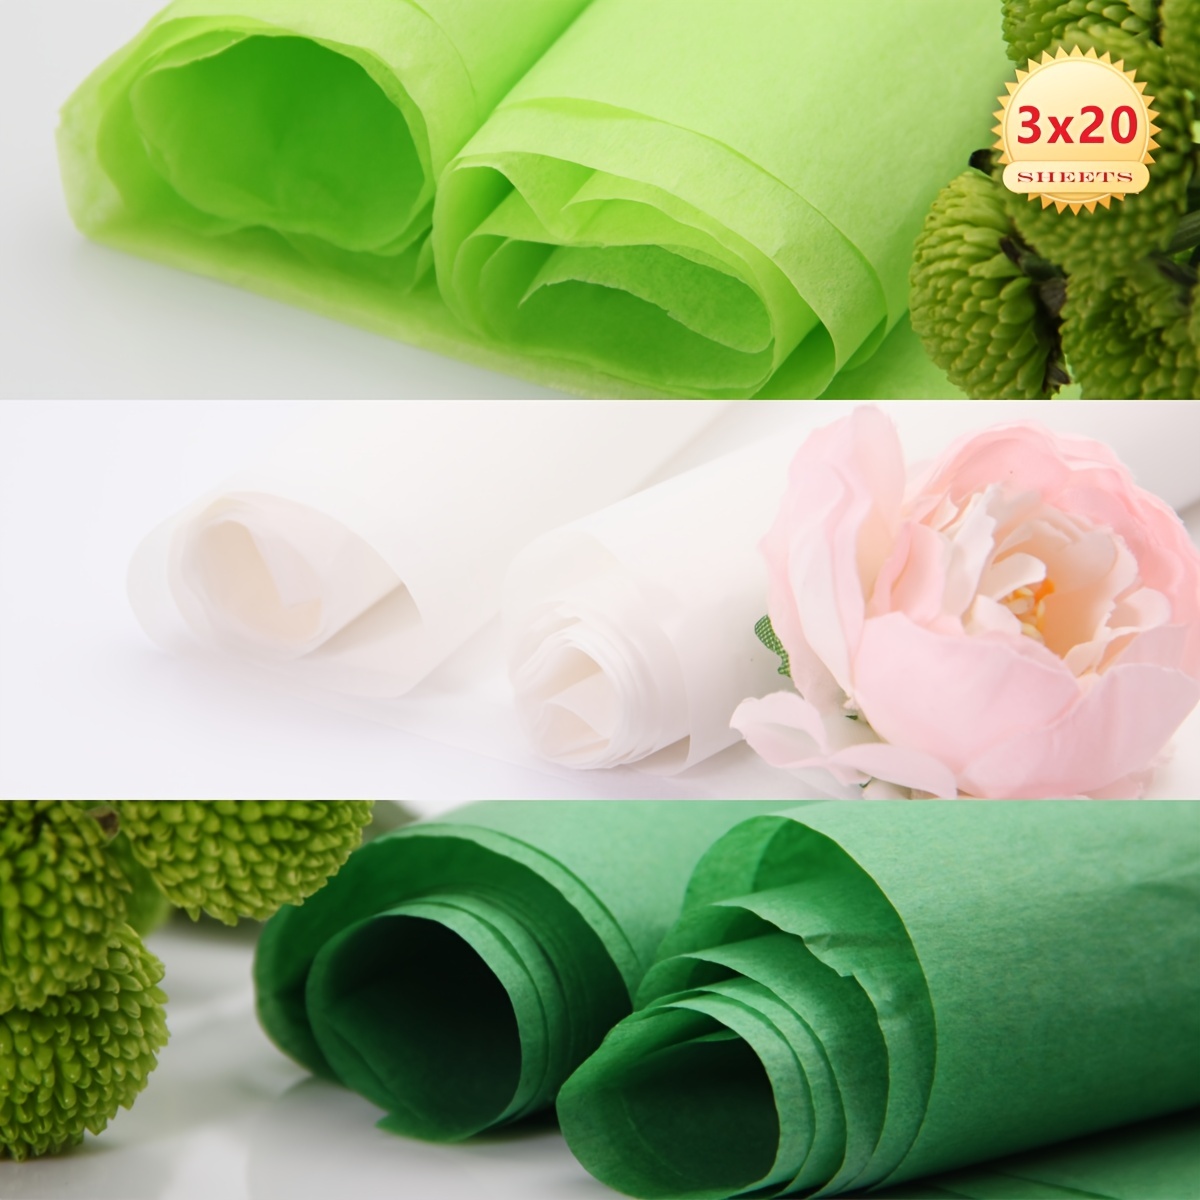 Wrapping a small bouquet with 2 sheets of tissue paper